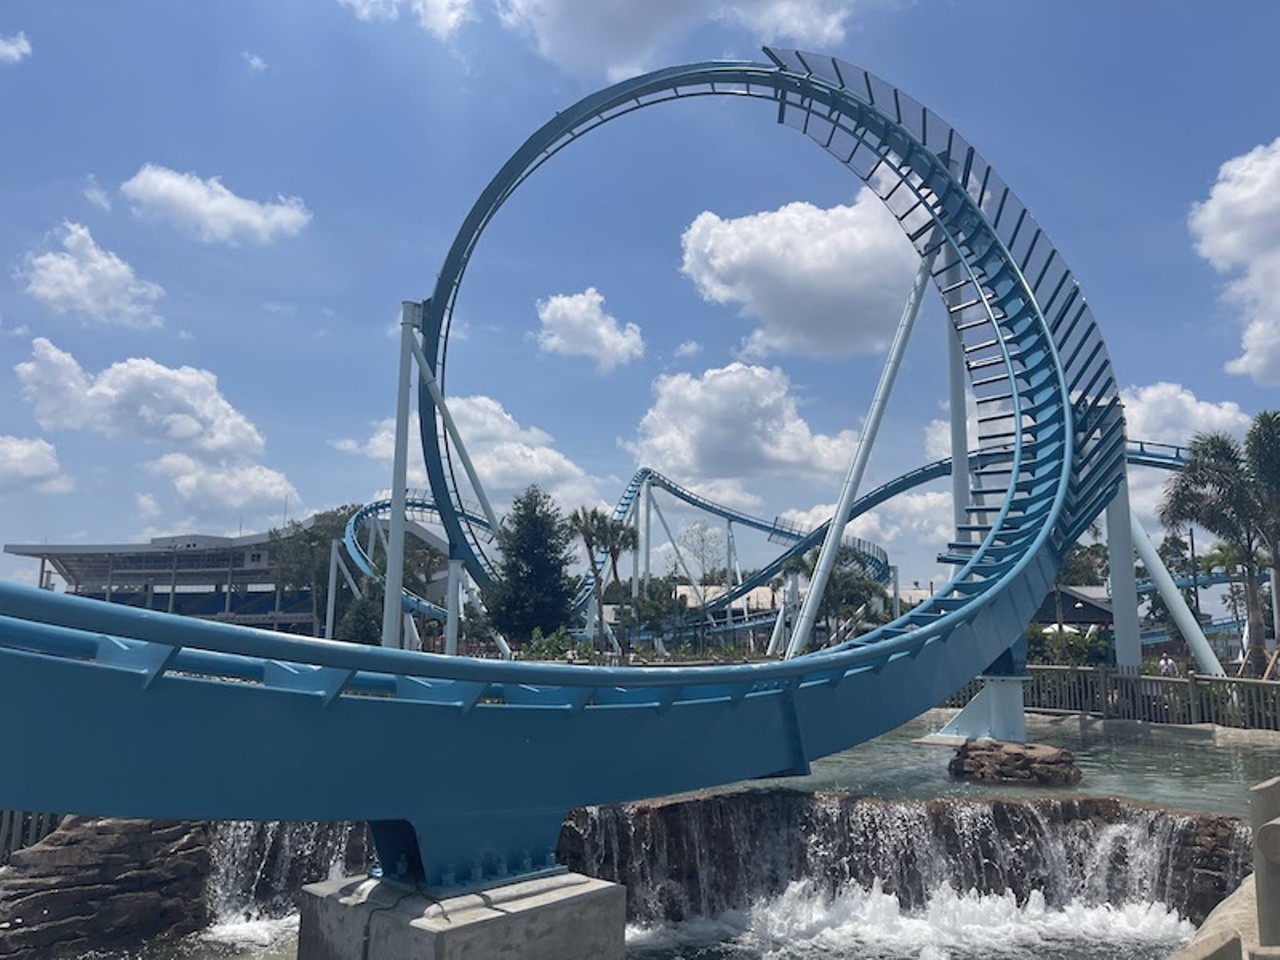 Pipeline, SeaWorld Orlando’s new stand-up surf-themed ride, is their seventh roller coaster.